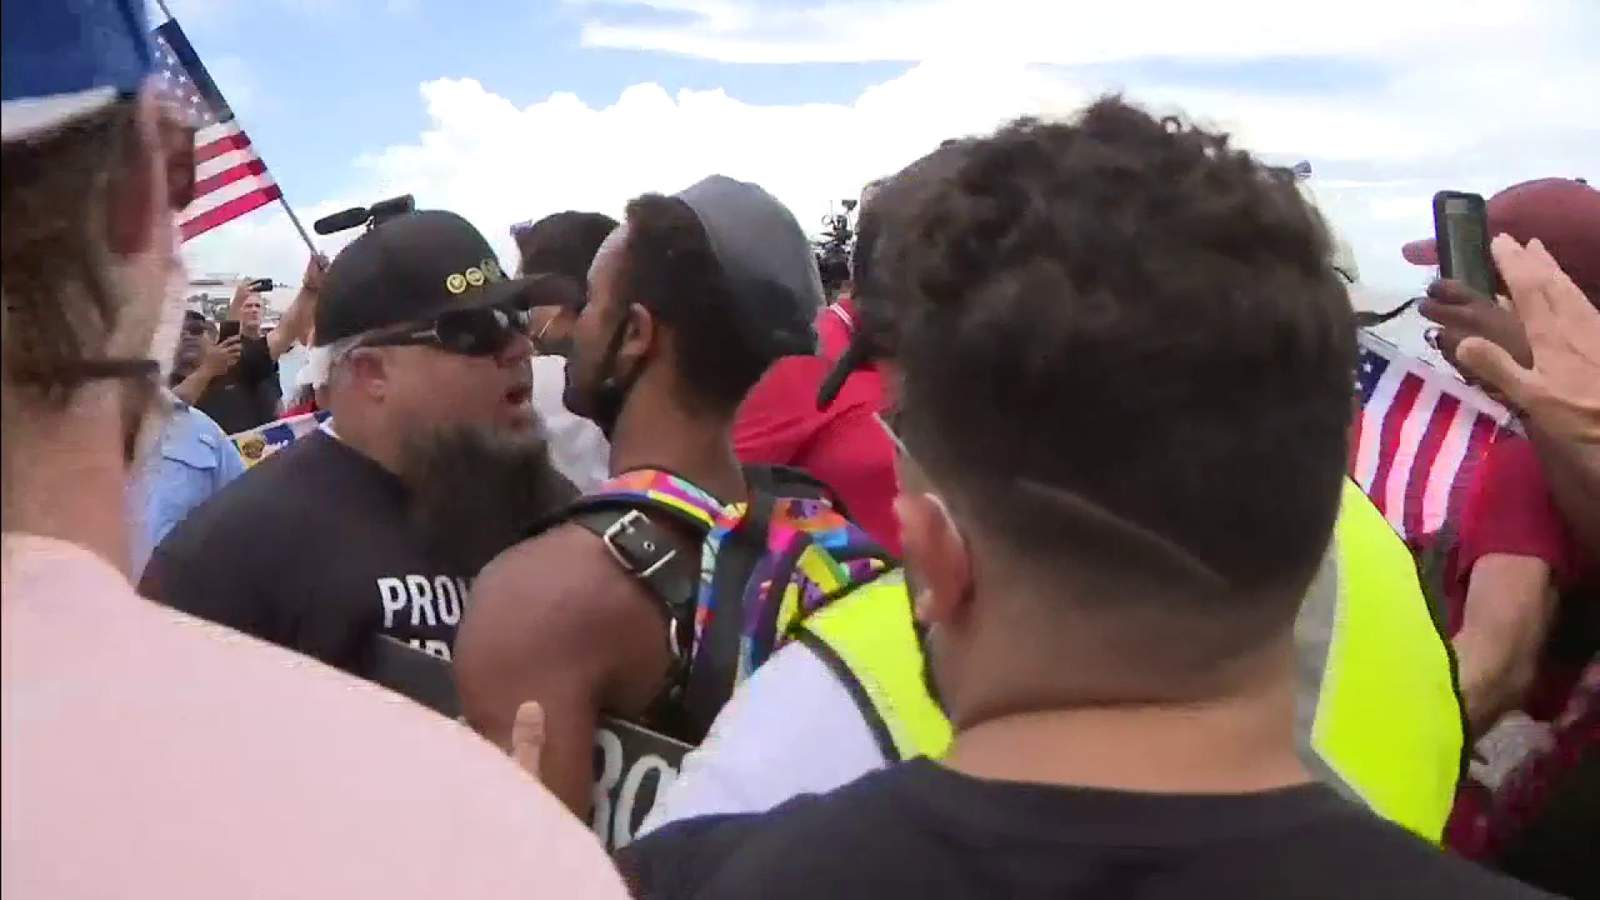 Law and Order supporters, BLM protesters clash in Miami